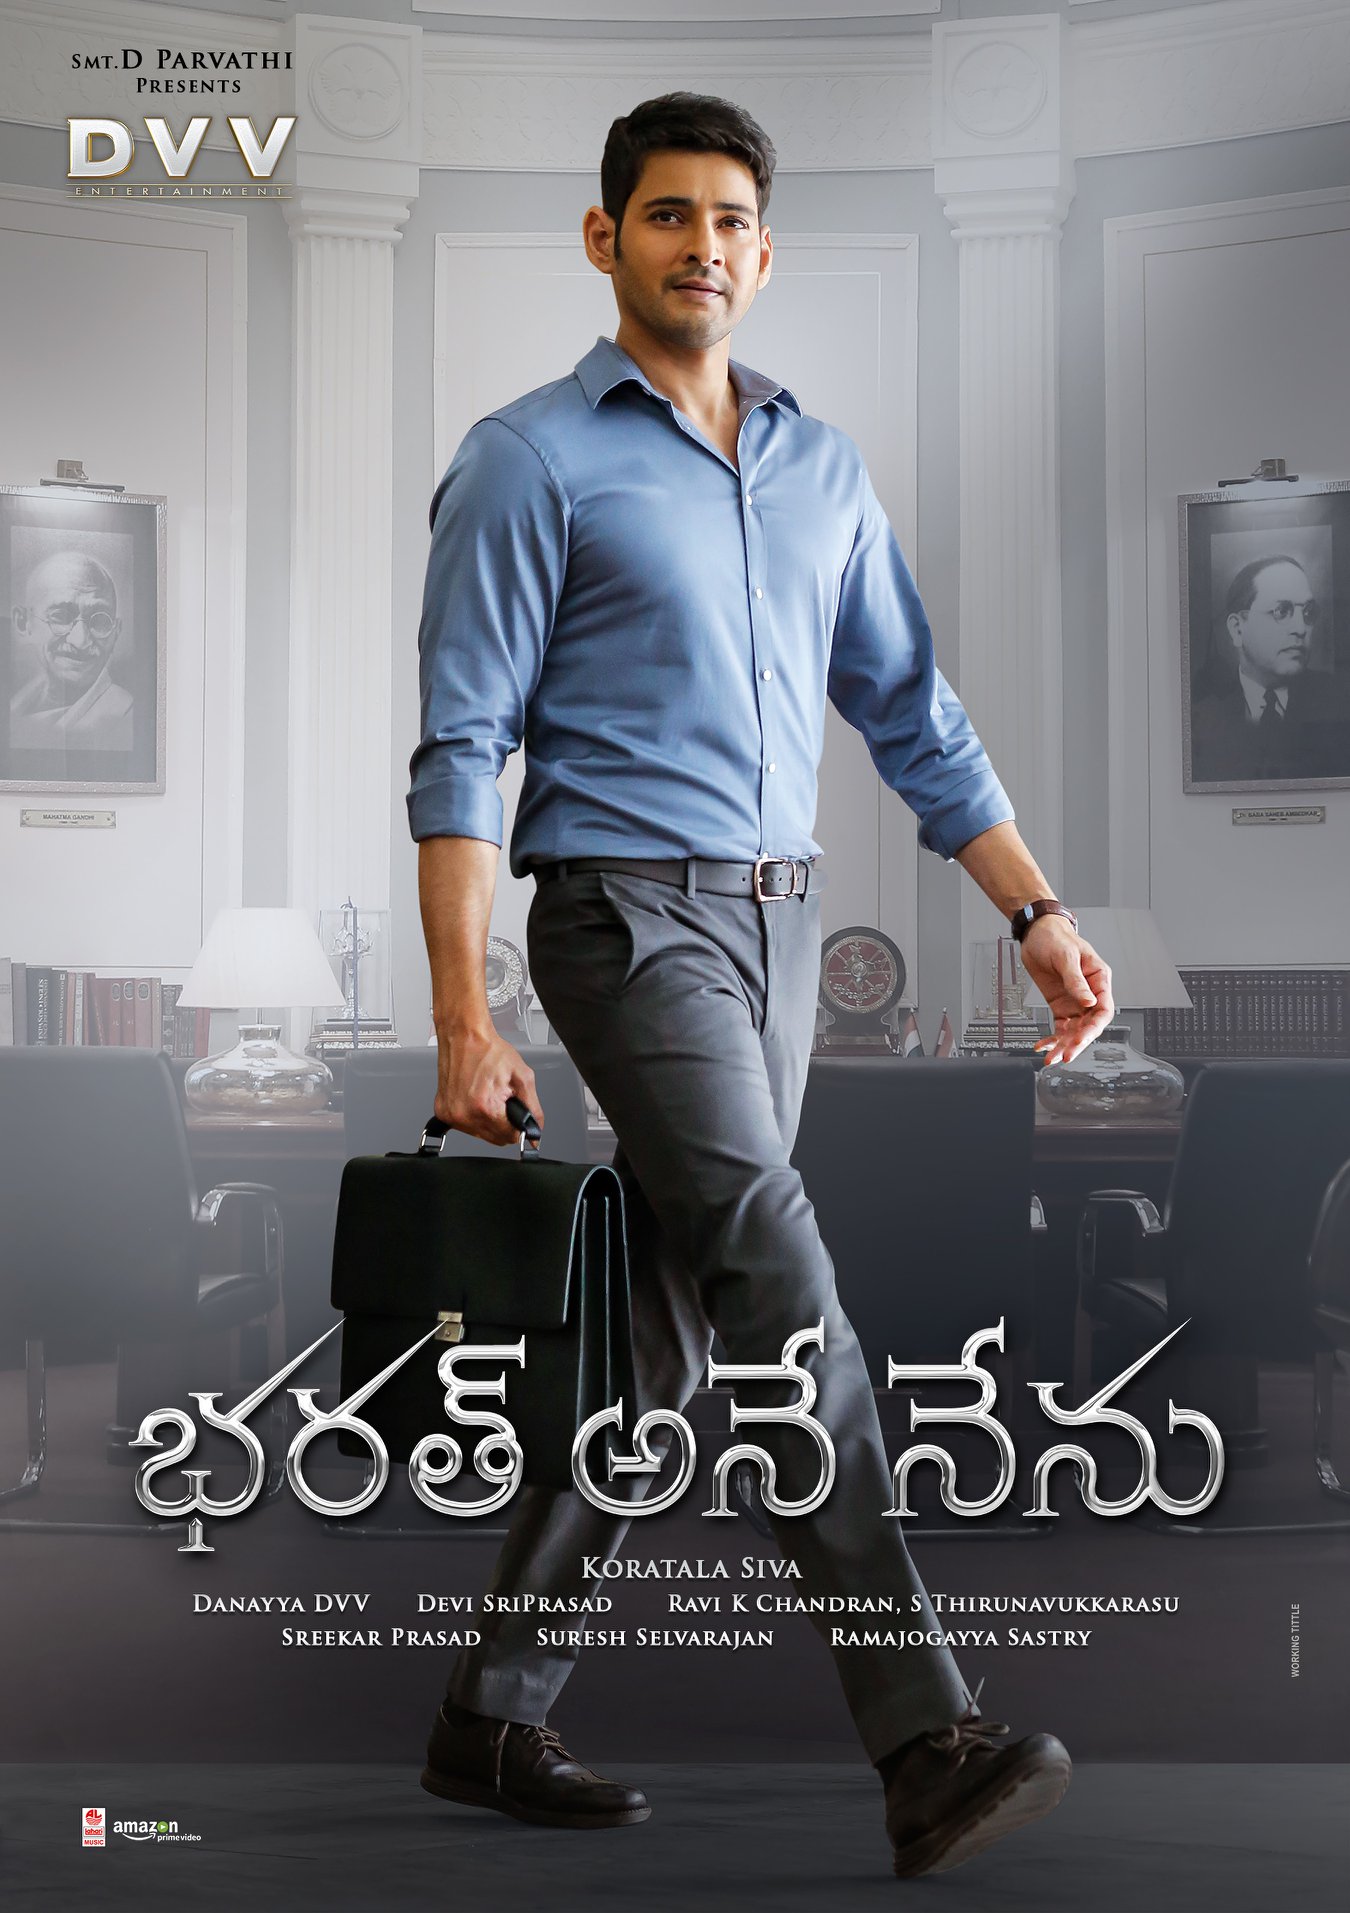 Bharat ane nenu songs free download for iphone